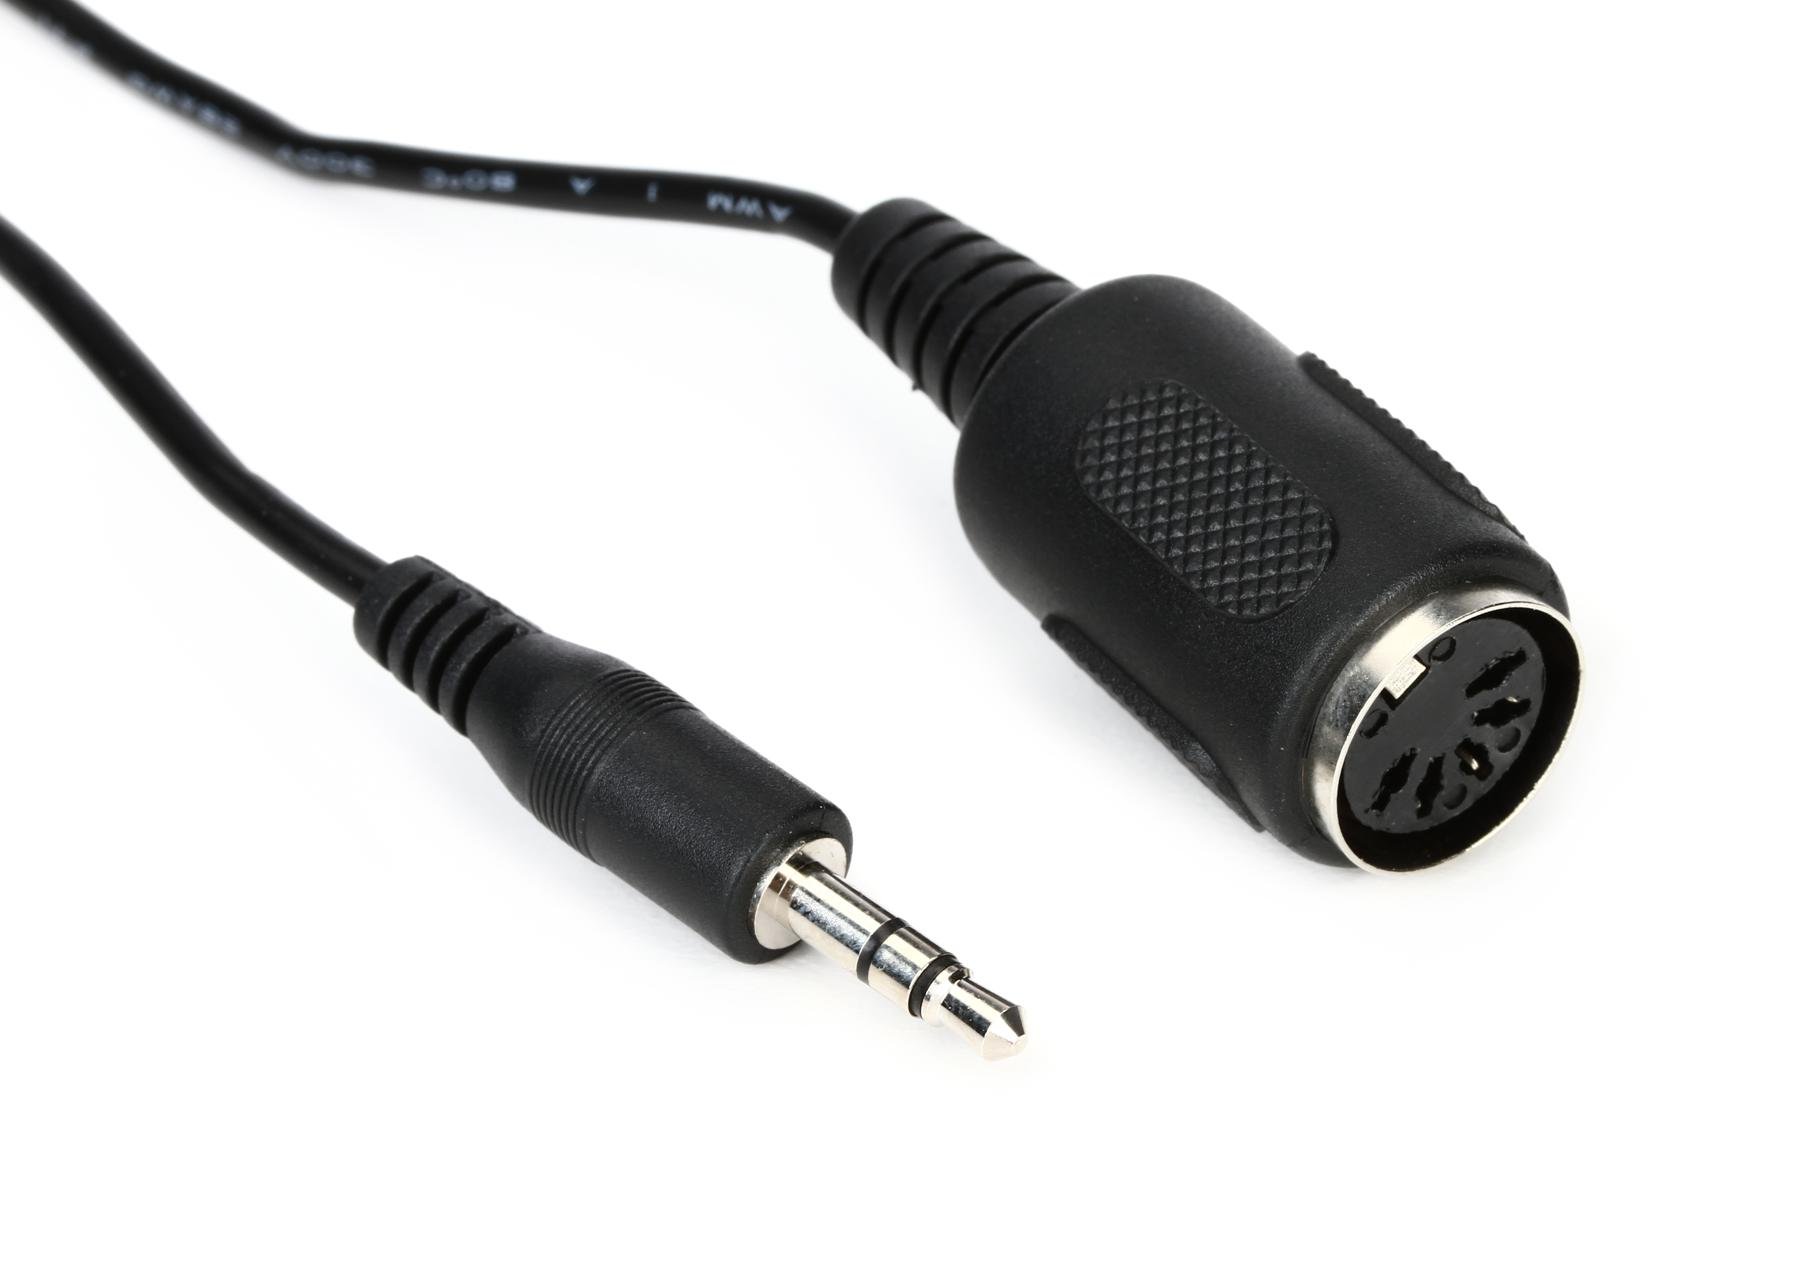 Make Noise 0-Coast MIDI Cable - Type A 3.5mm TRS to 5-pin MIDI 